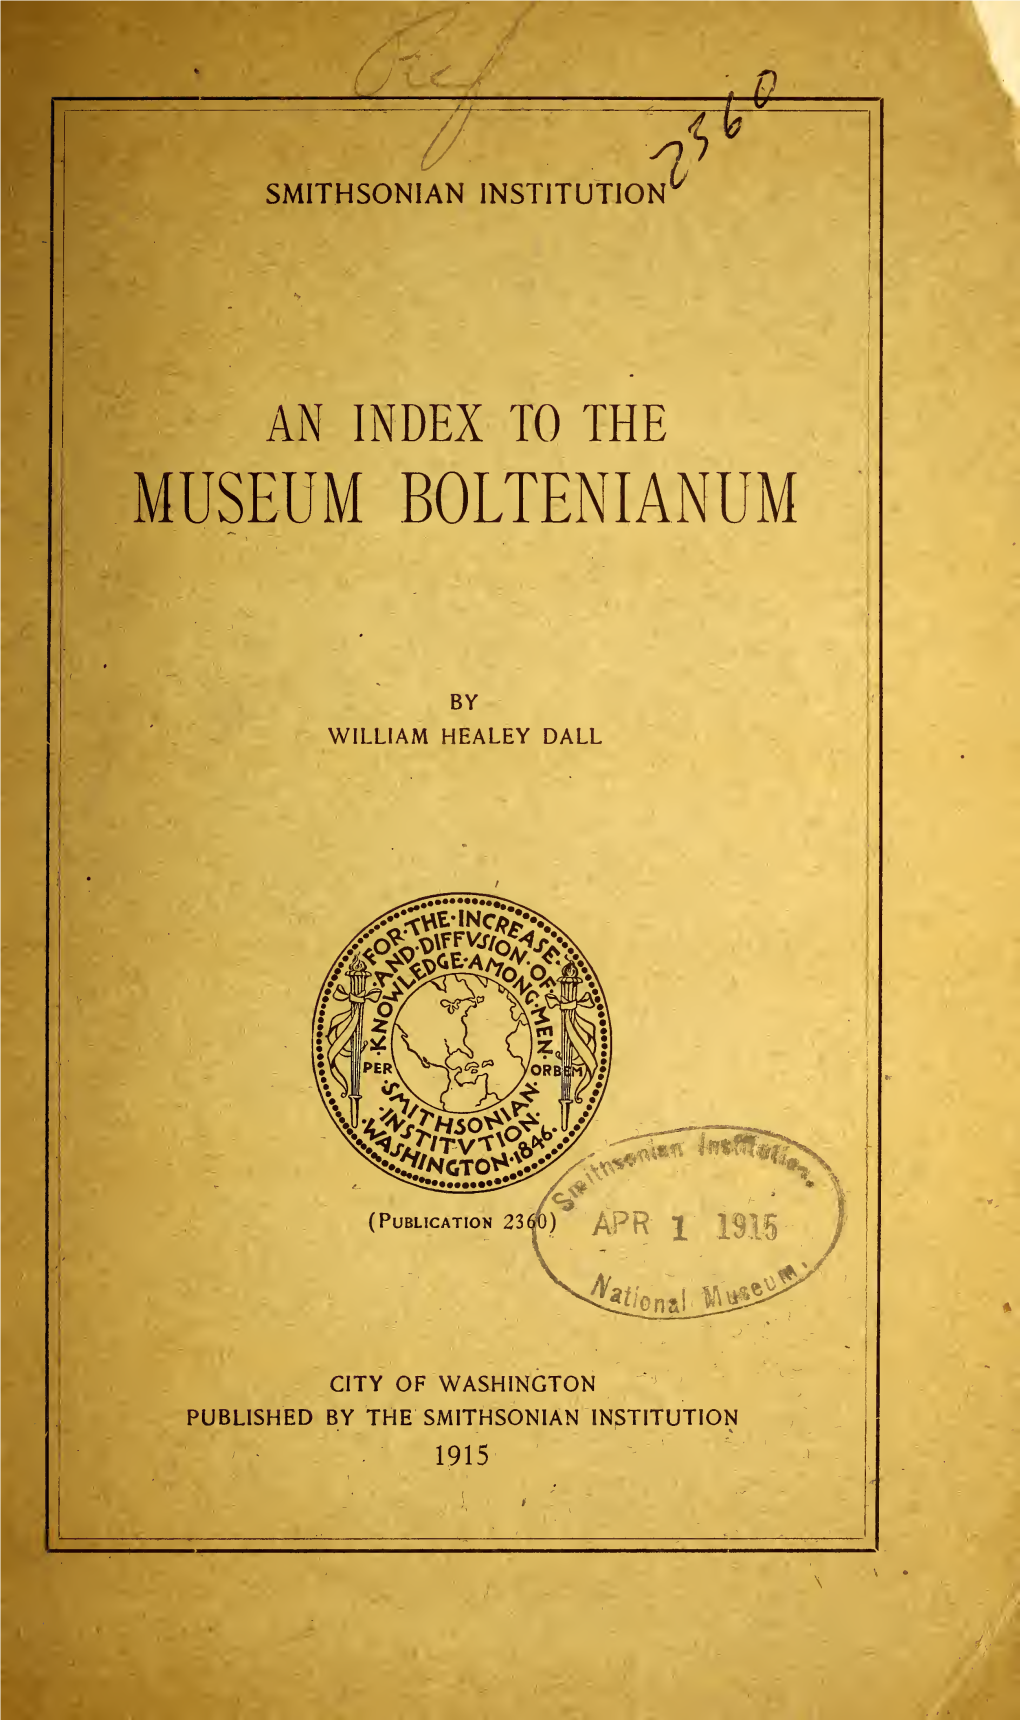 An Index to the Museum Boltenianum